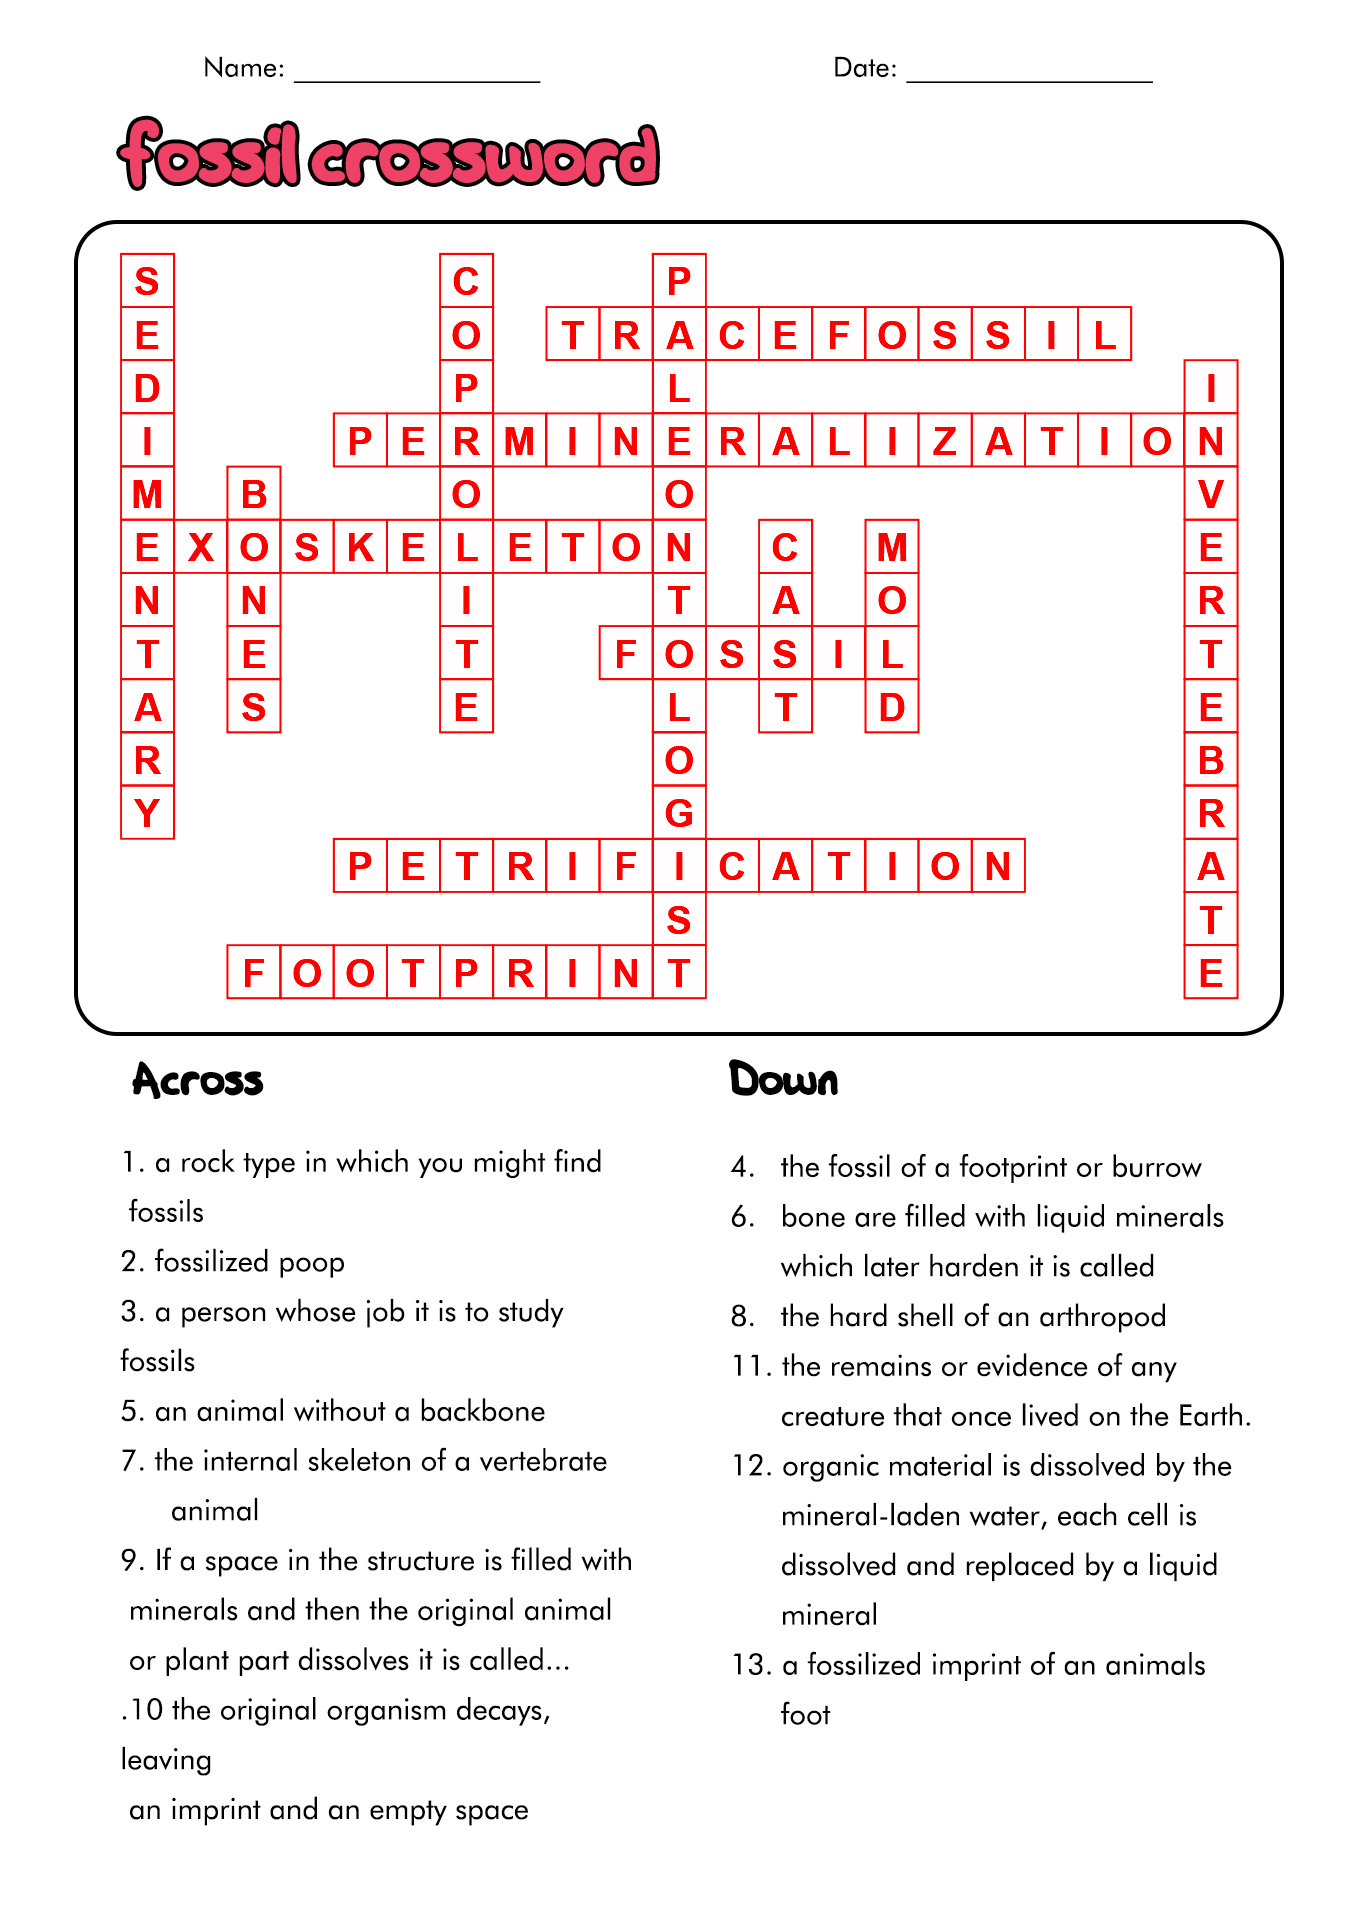 Fossil Crossword Puzzle Answers Image